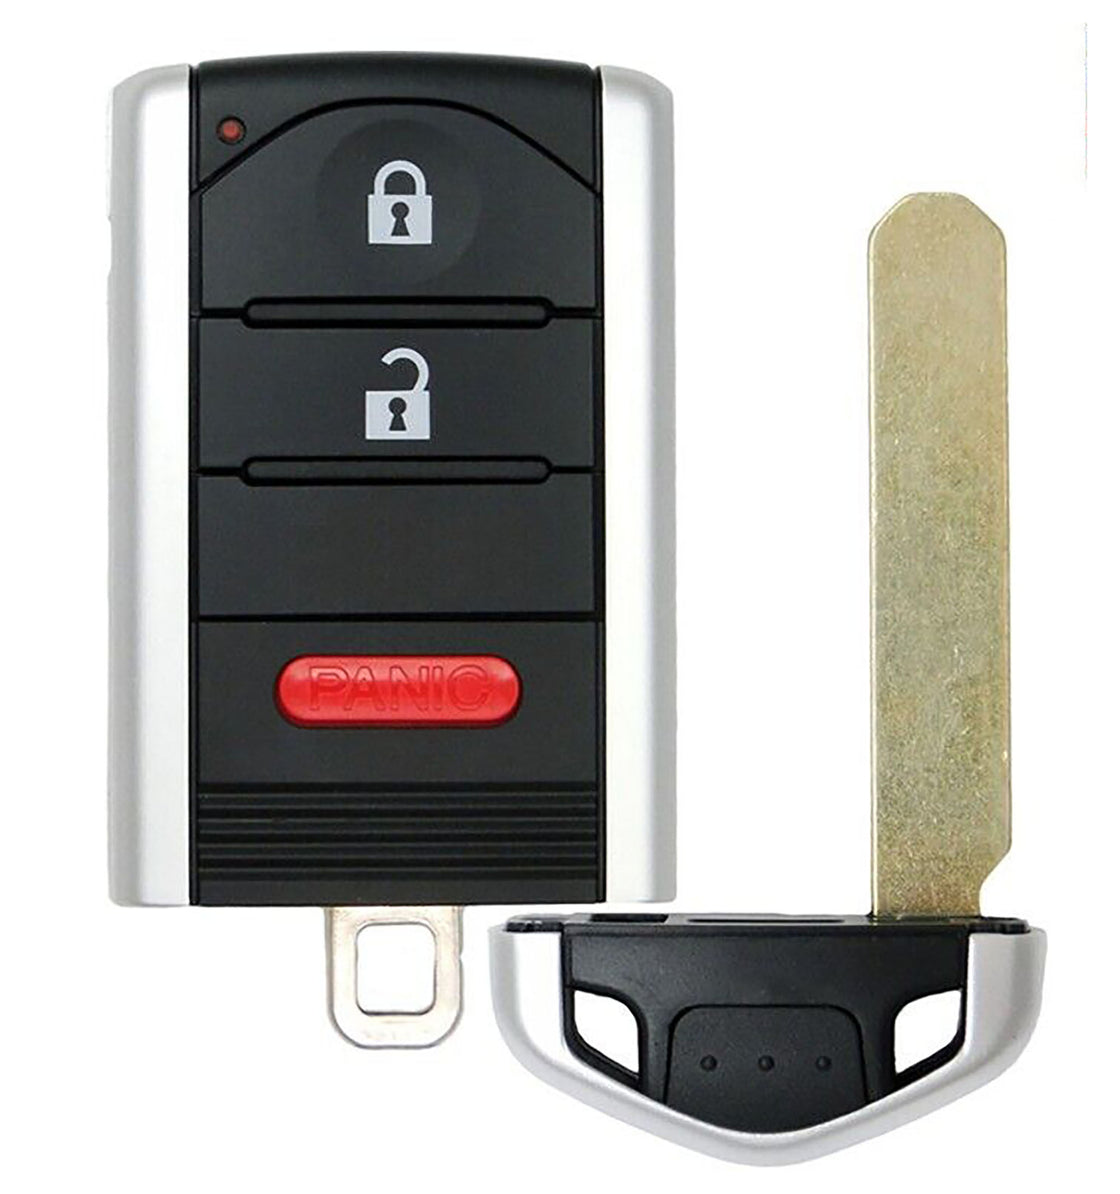 1x New Replacement Proximity Key Fob Compatible with & Fit For Acura Vehicles (Check Fitment) - MPN KR5434760-02